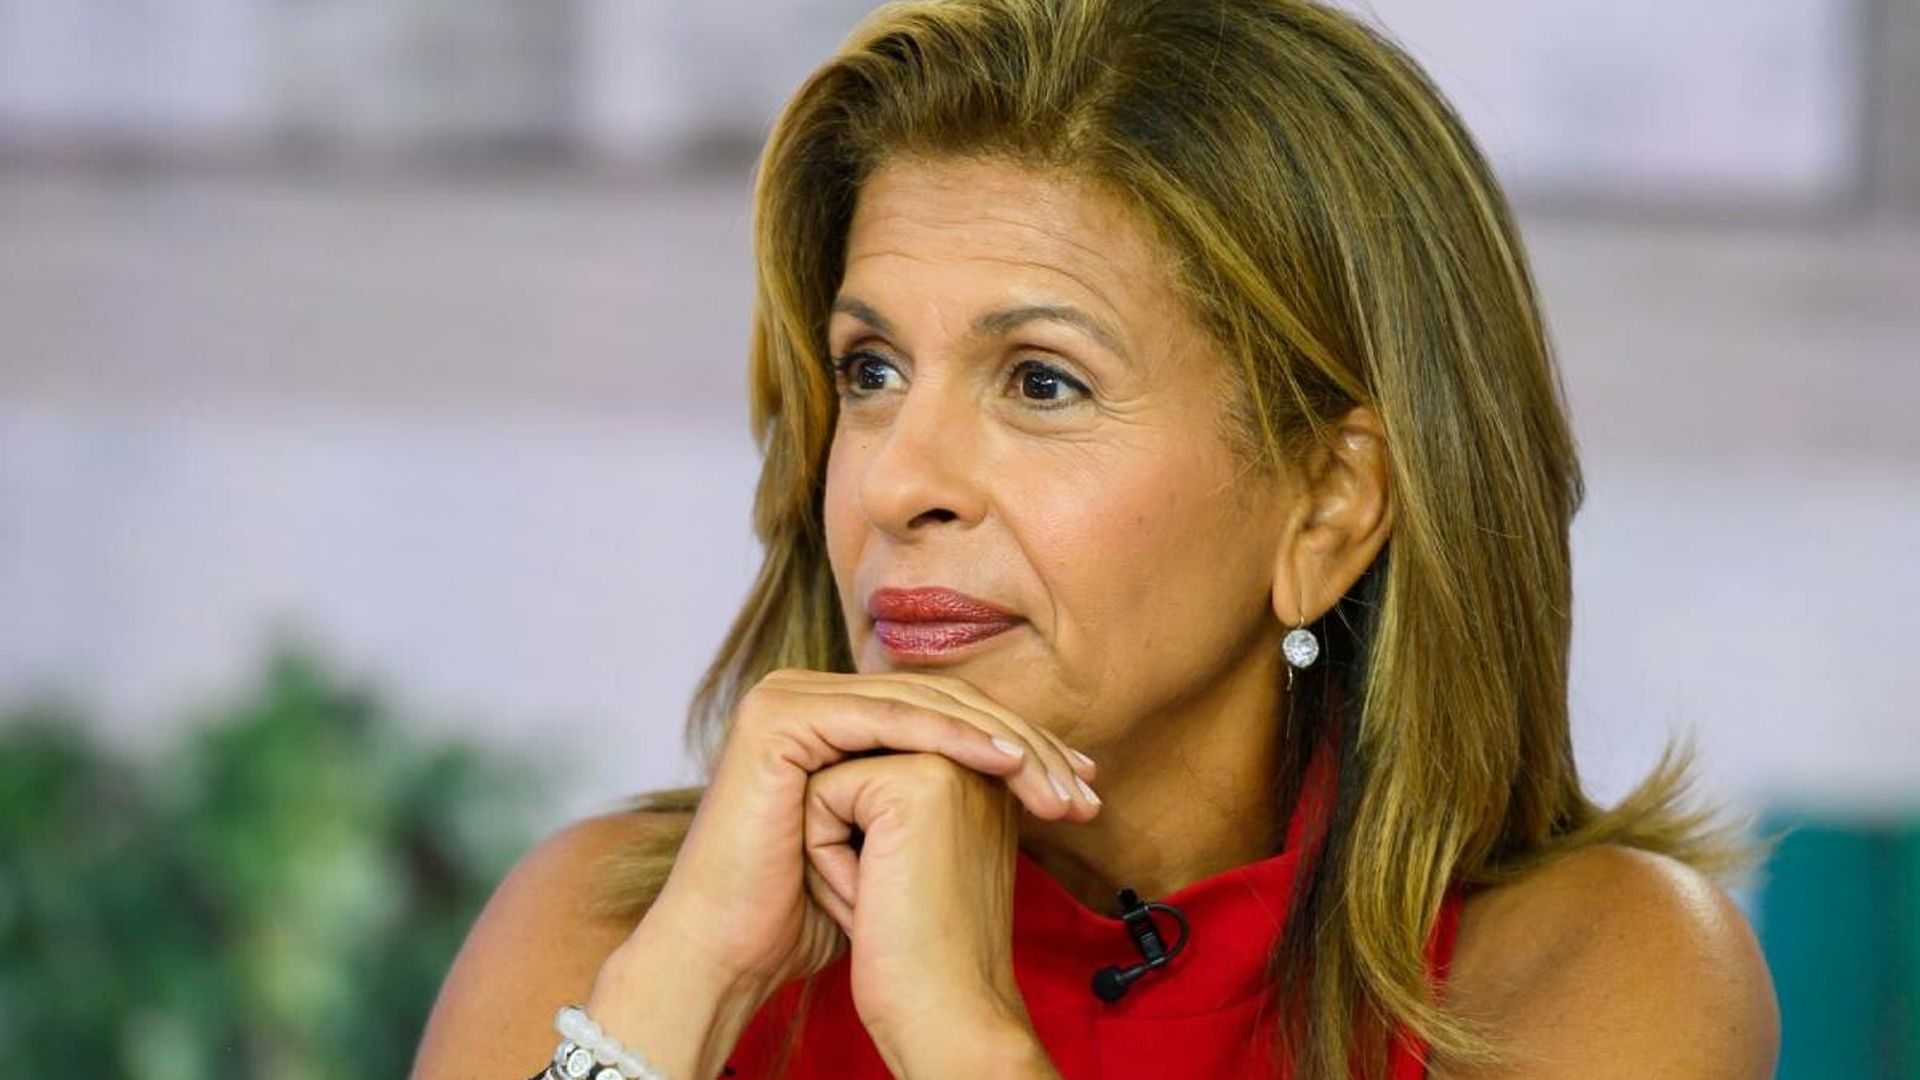 Hoda Kotb inundated with prayers after shock health diagnosis